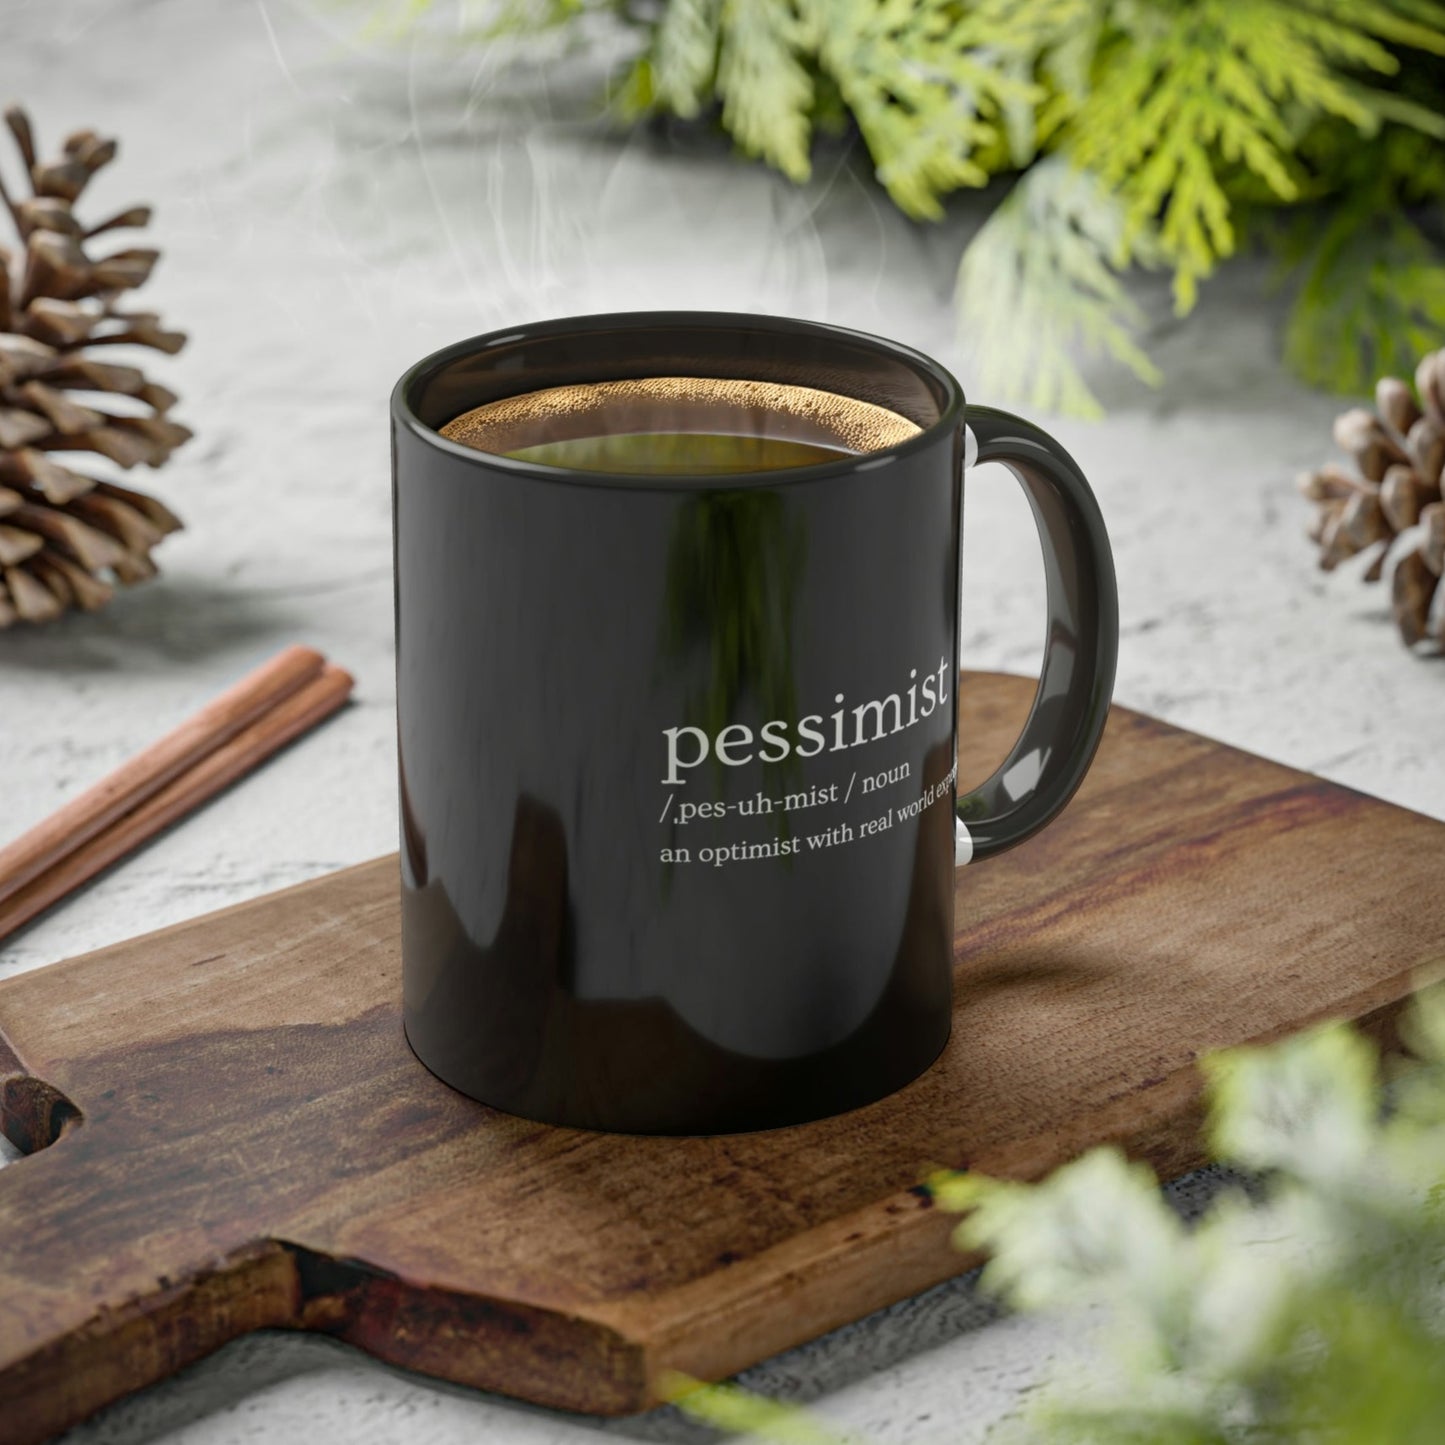 pessimist-definition-an-optimist-with-real-world-experience-glossy-mug-11-oz-orca-coating-on-a-cutting-board-view